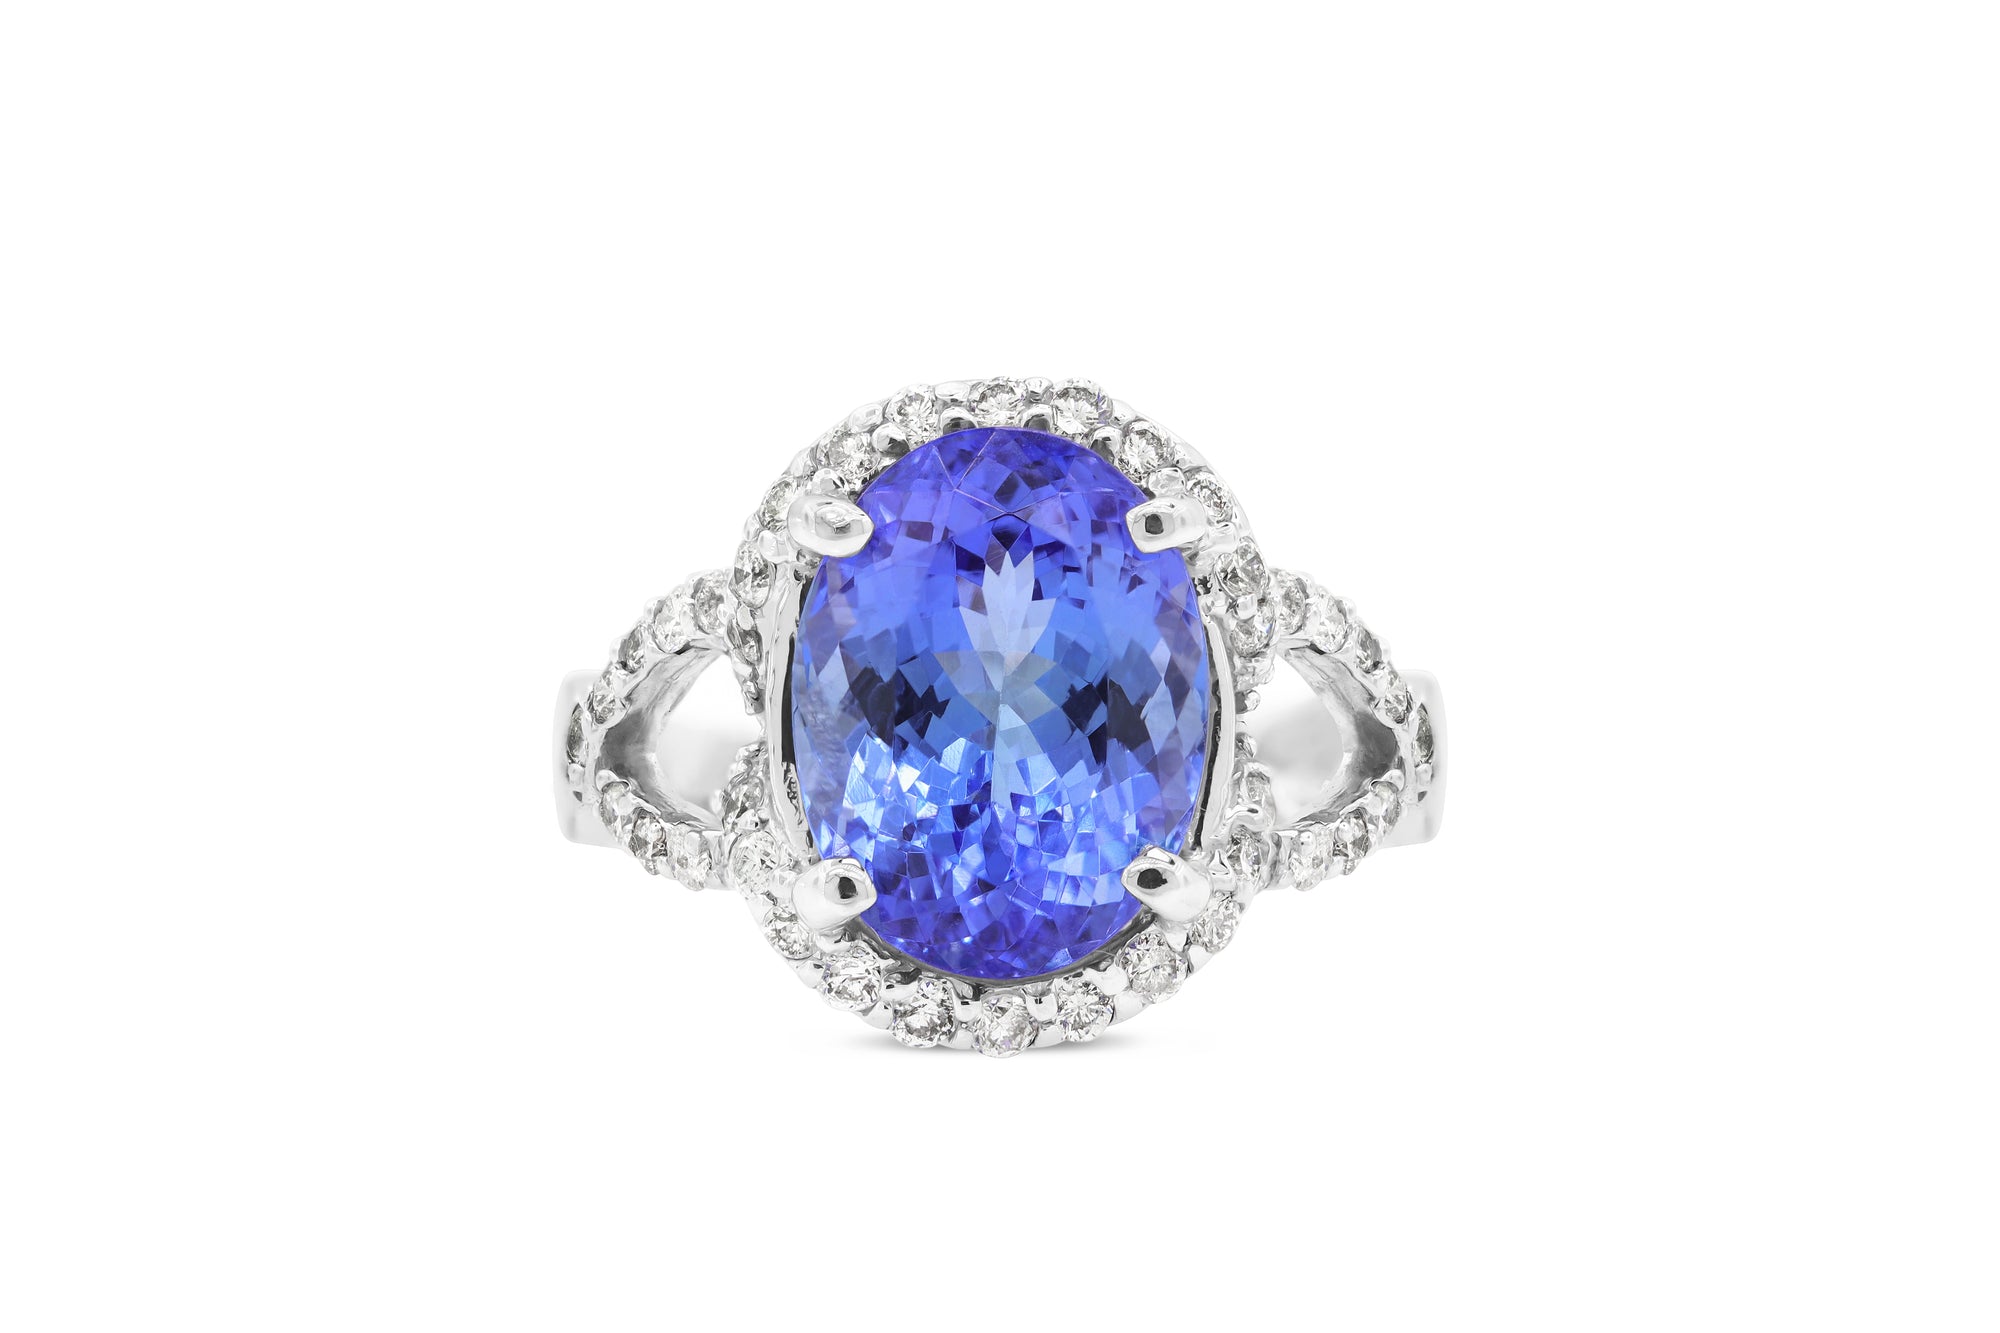 4.79 CT Oval Tanzanite Diamond Ring 0.82 CT TW 14K White Gold TZR013 - NorthandSouthJewelry